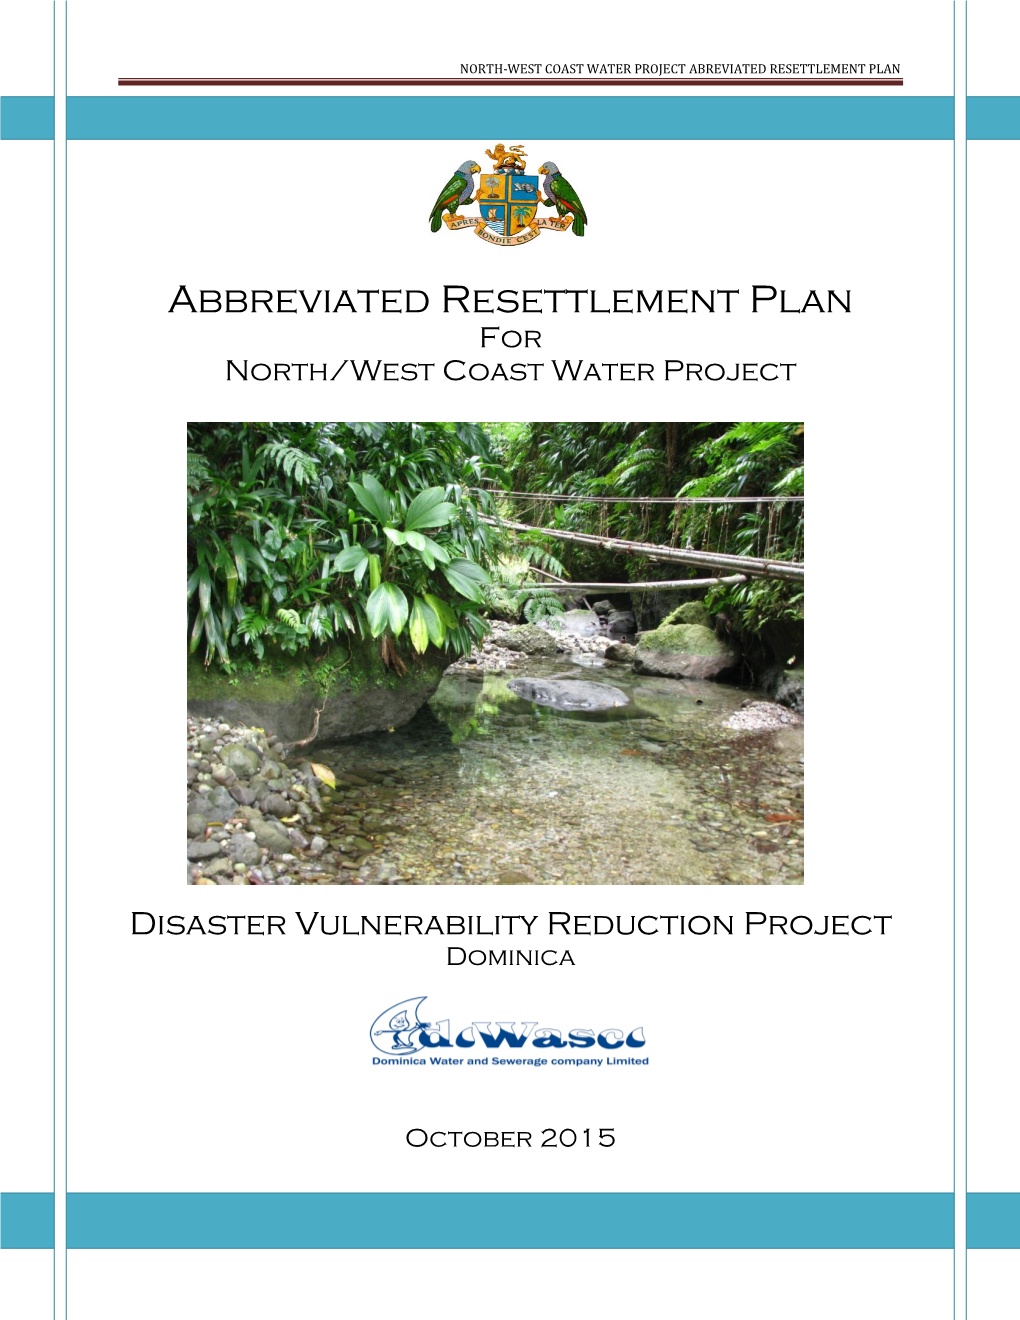 Disaster Vulnerability Reduction Project Dominica